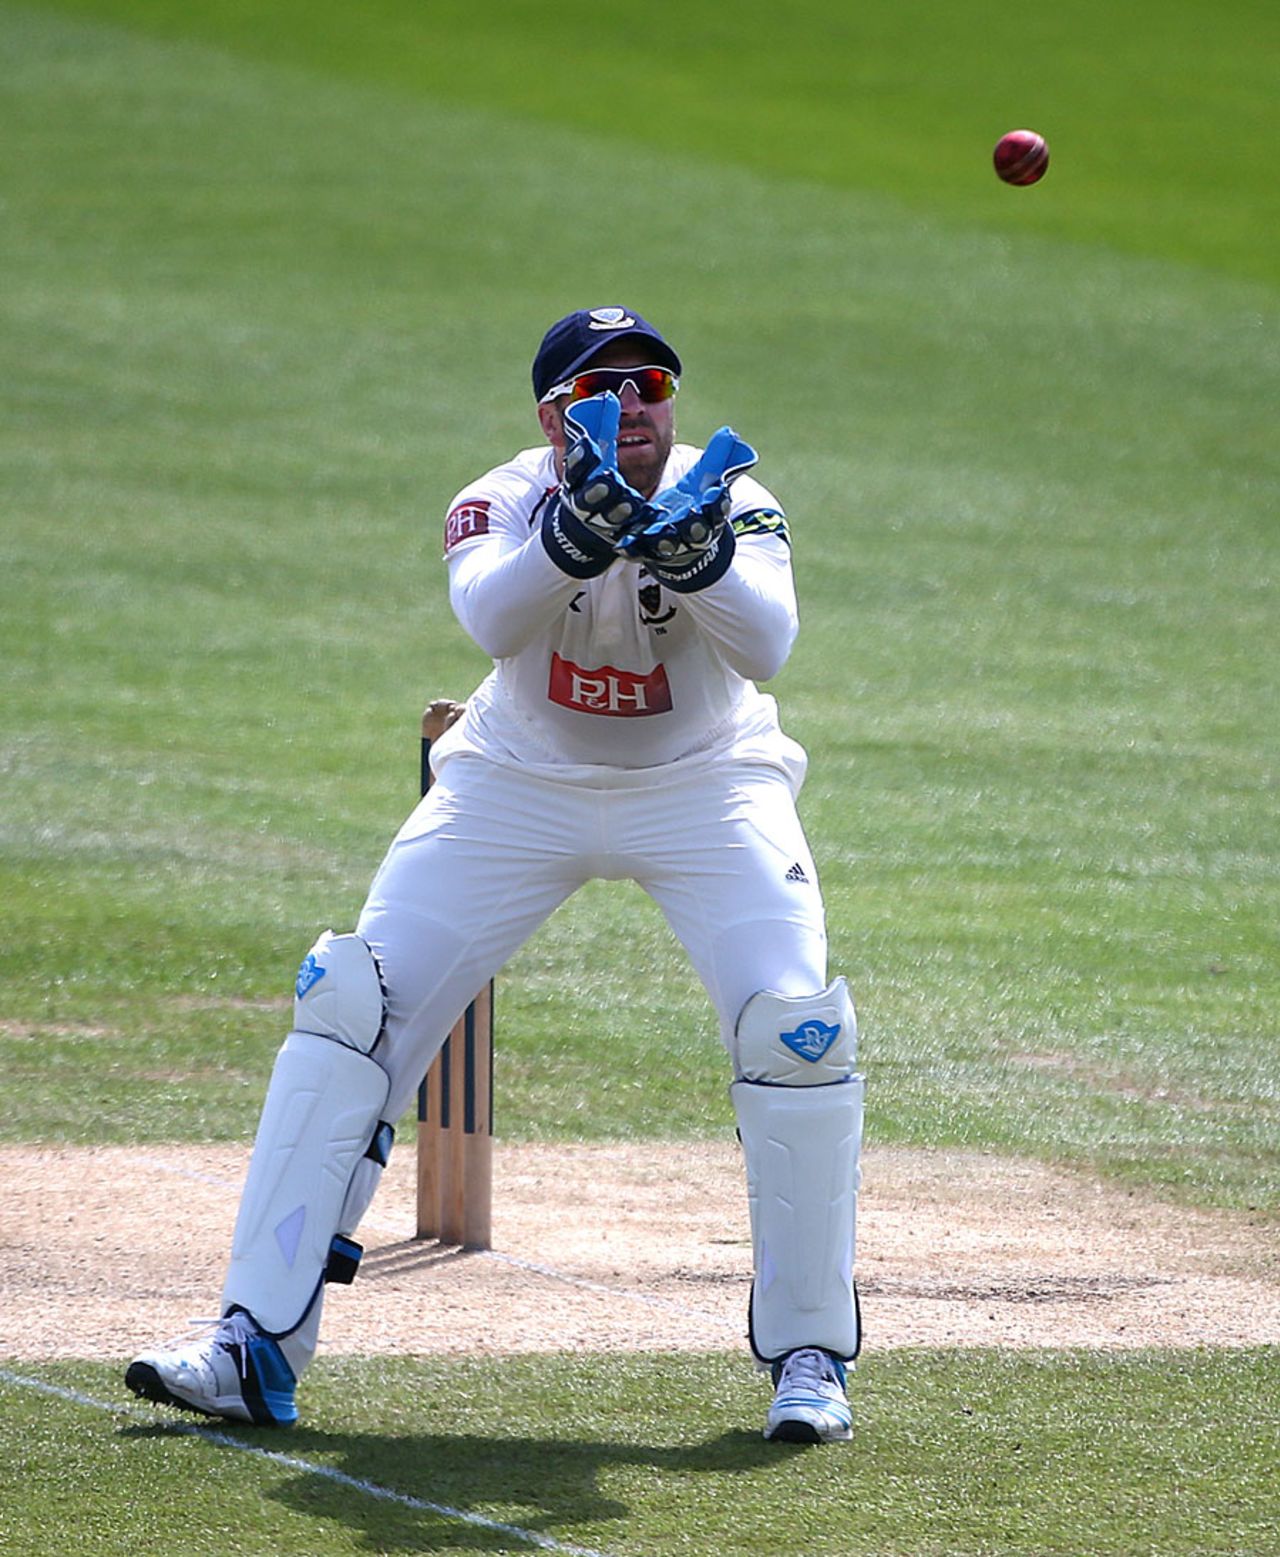 Will Matt Prior be back at Sussex?, Sussex v Nottinghamshire, County Championship, Division One, Hove, June 2, 2014